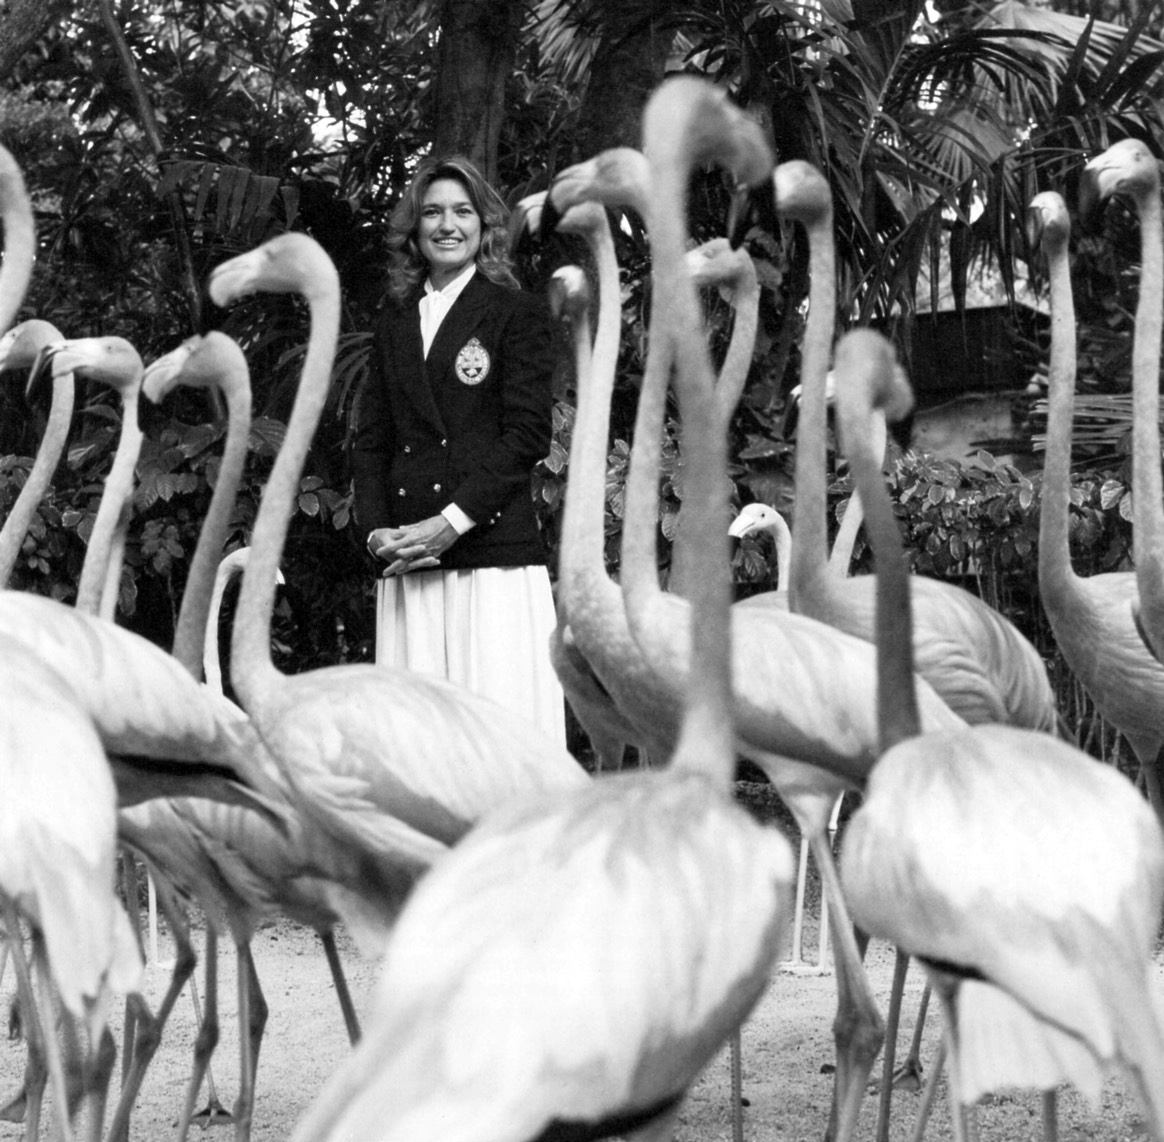 Lynn Holowesko - President of the Bahamas National Trust.  She oversees the well-being of the National Bird of the Bahamas, the flamingo - Nassau